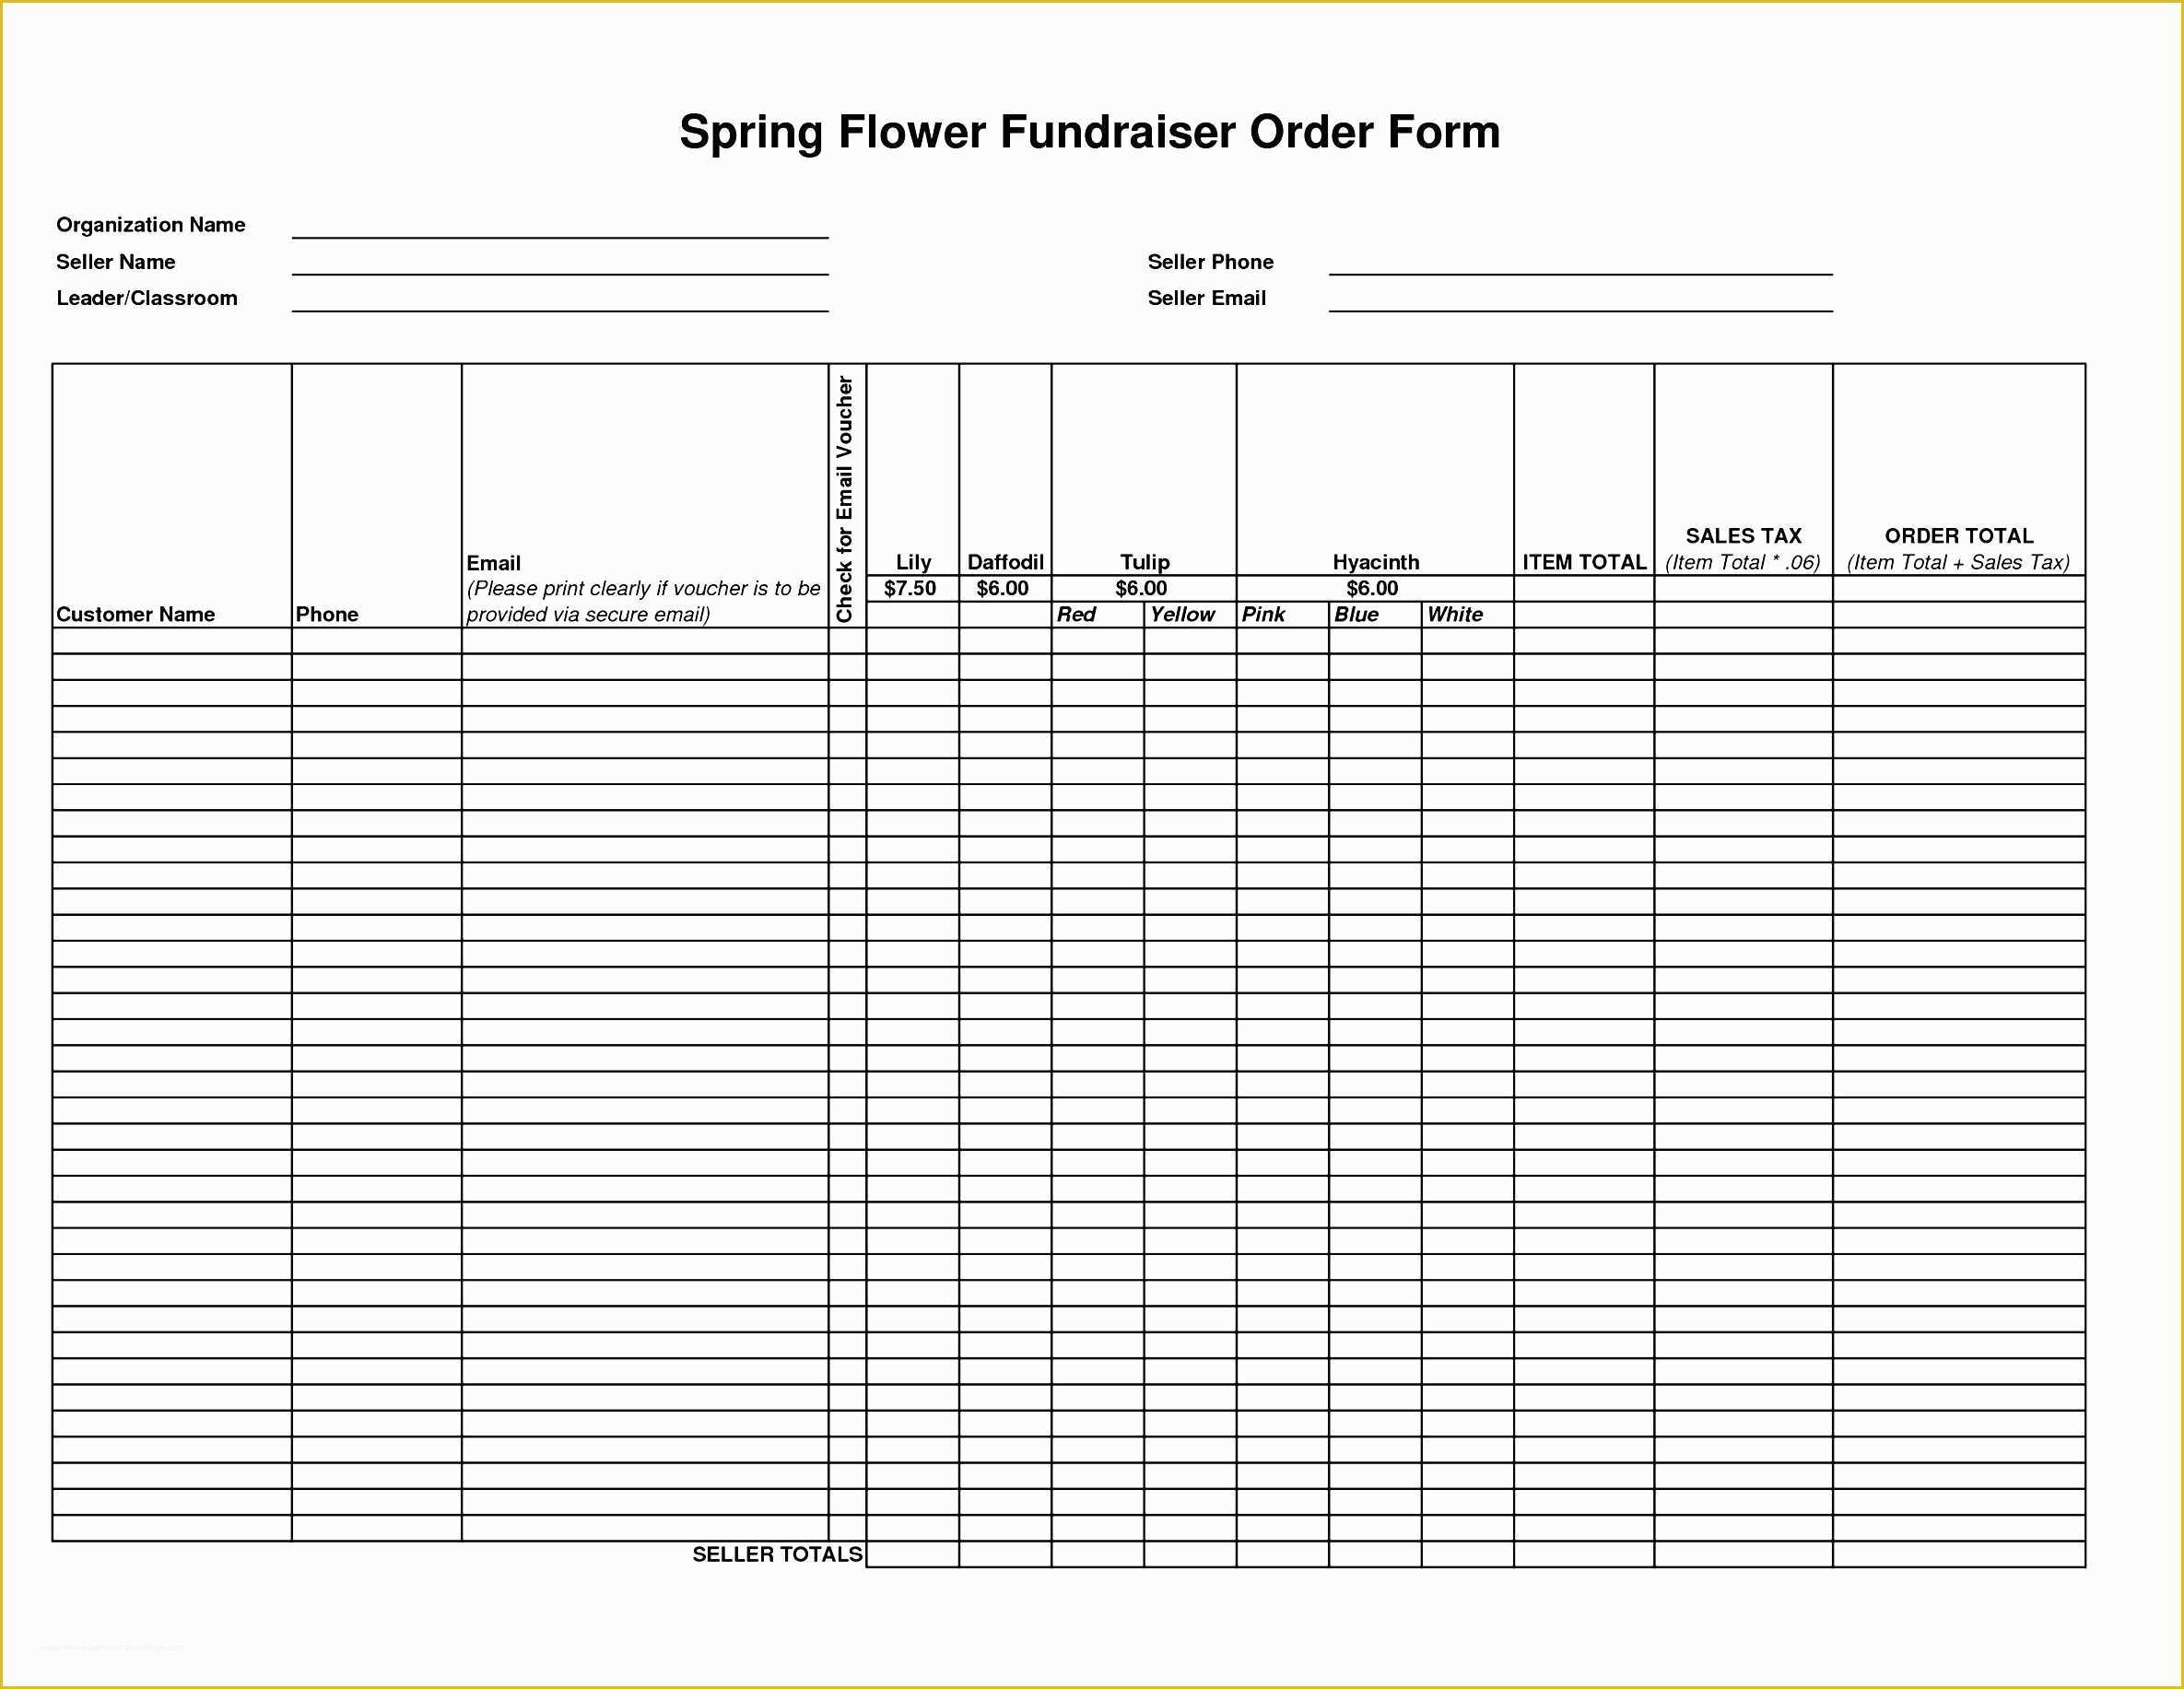 Fundraising forms Templates Free Of Collection solutions Flower Fundraiser order forms